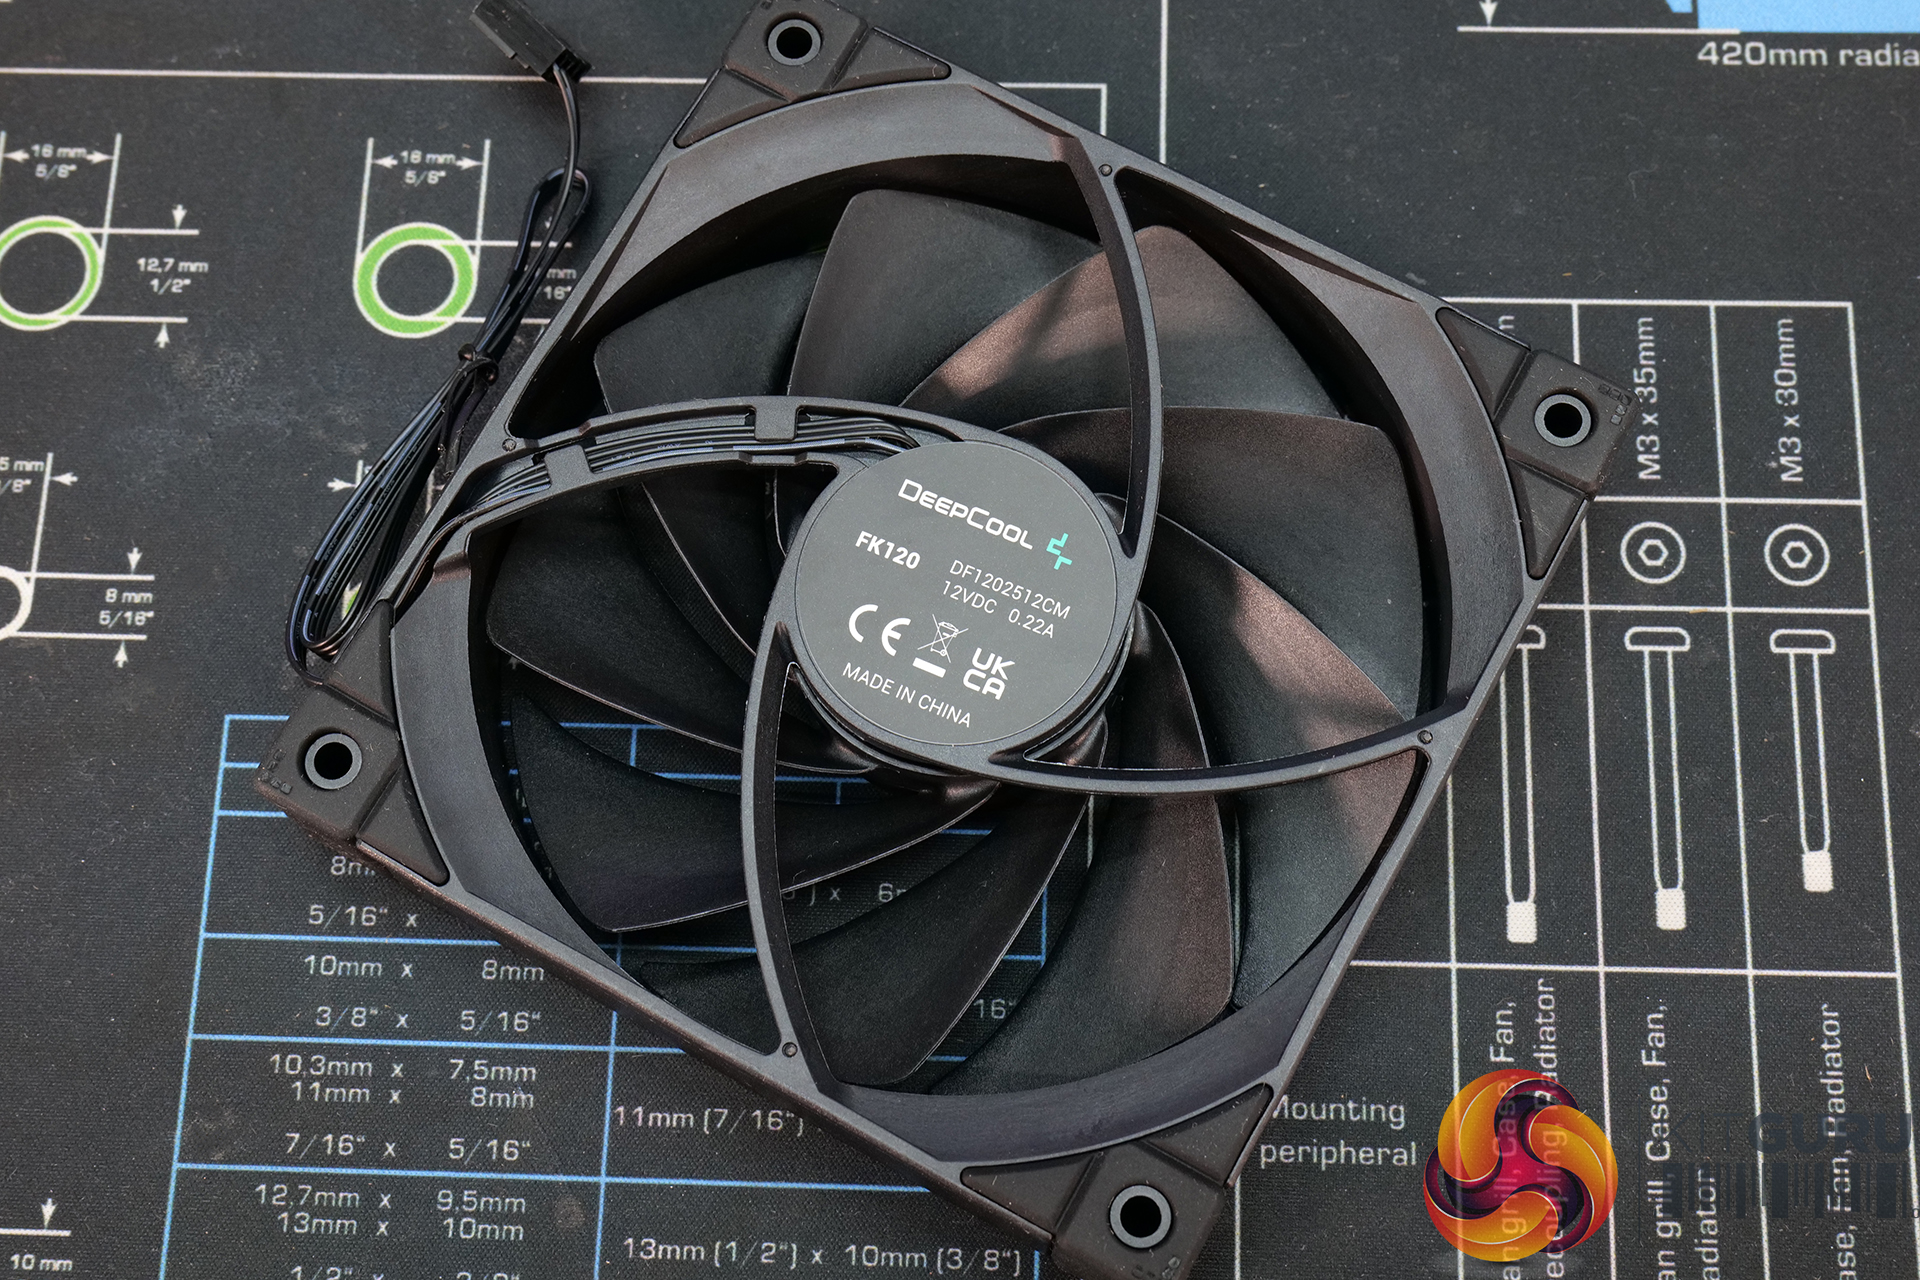 DeepCool LT720 Review (Page 3 of 4)